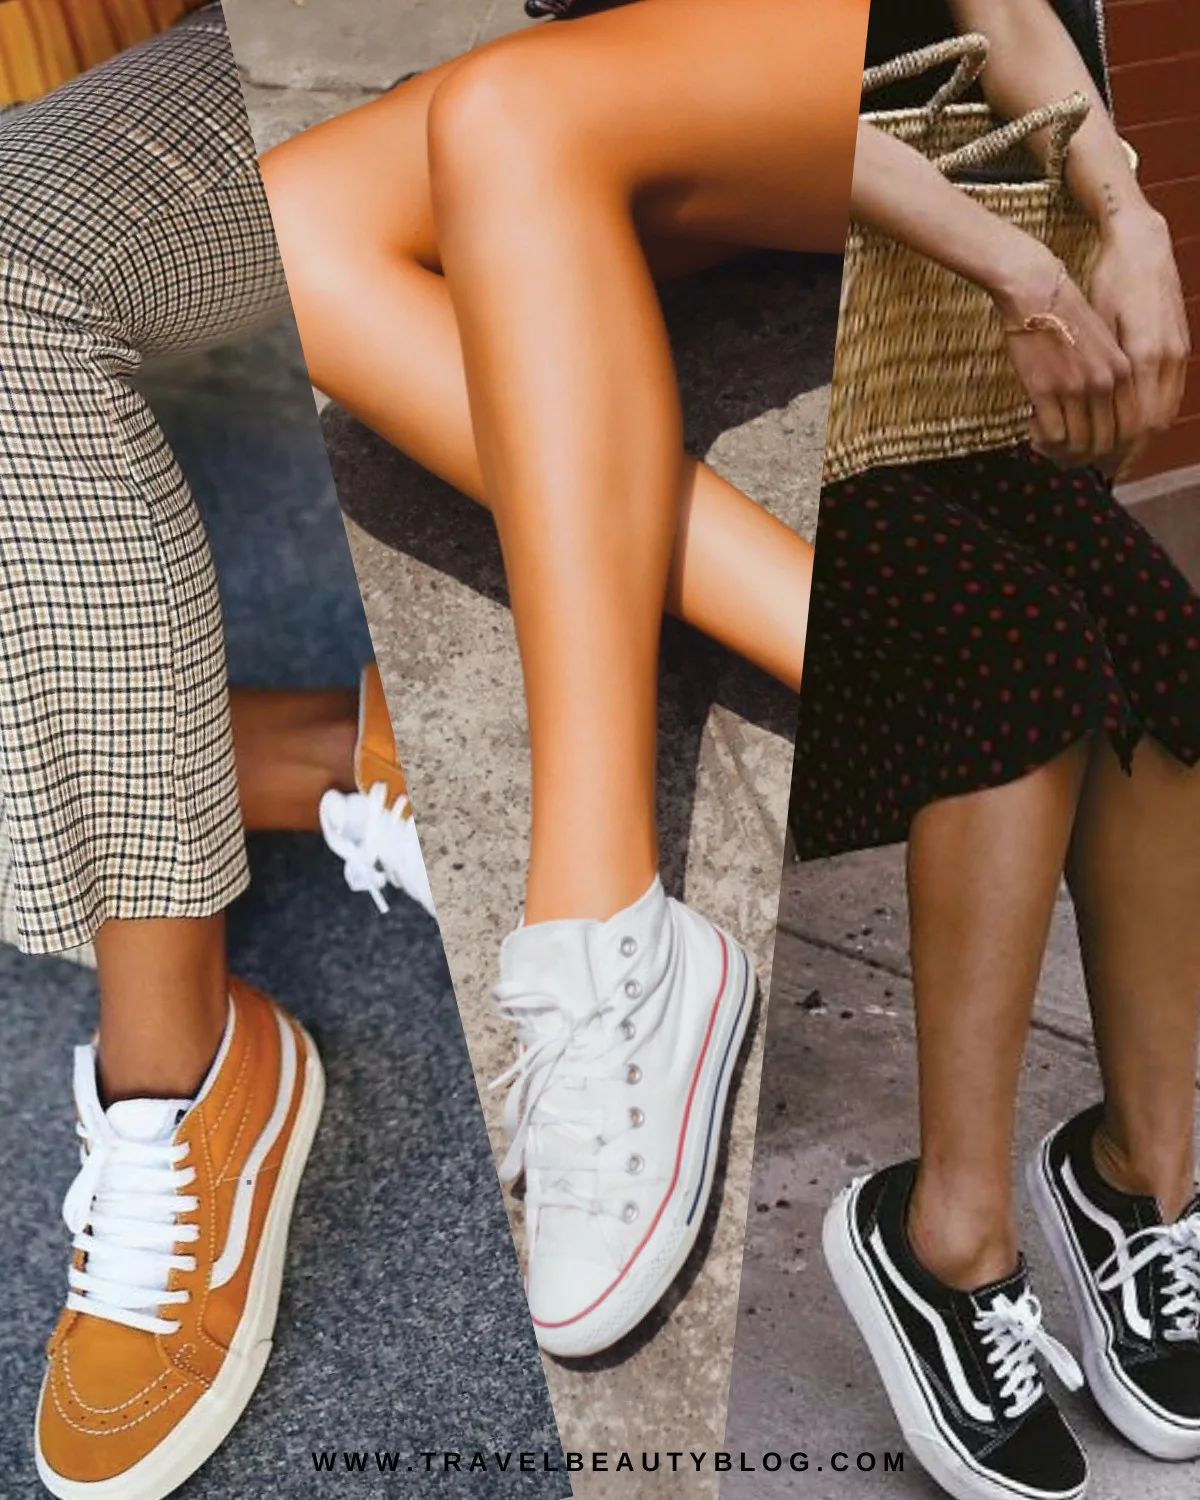 Vans vs Converse: Which Brand Makes the Best Sneakers? | Travel Beauty Blog